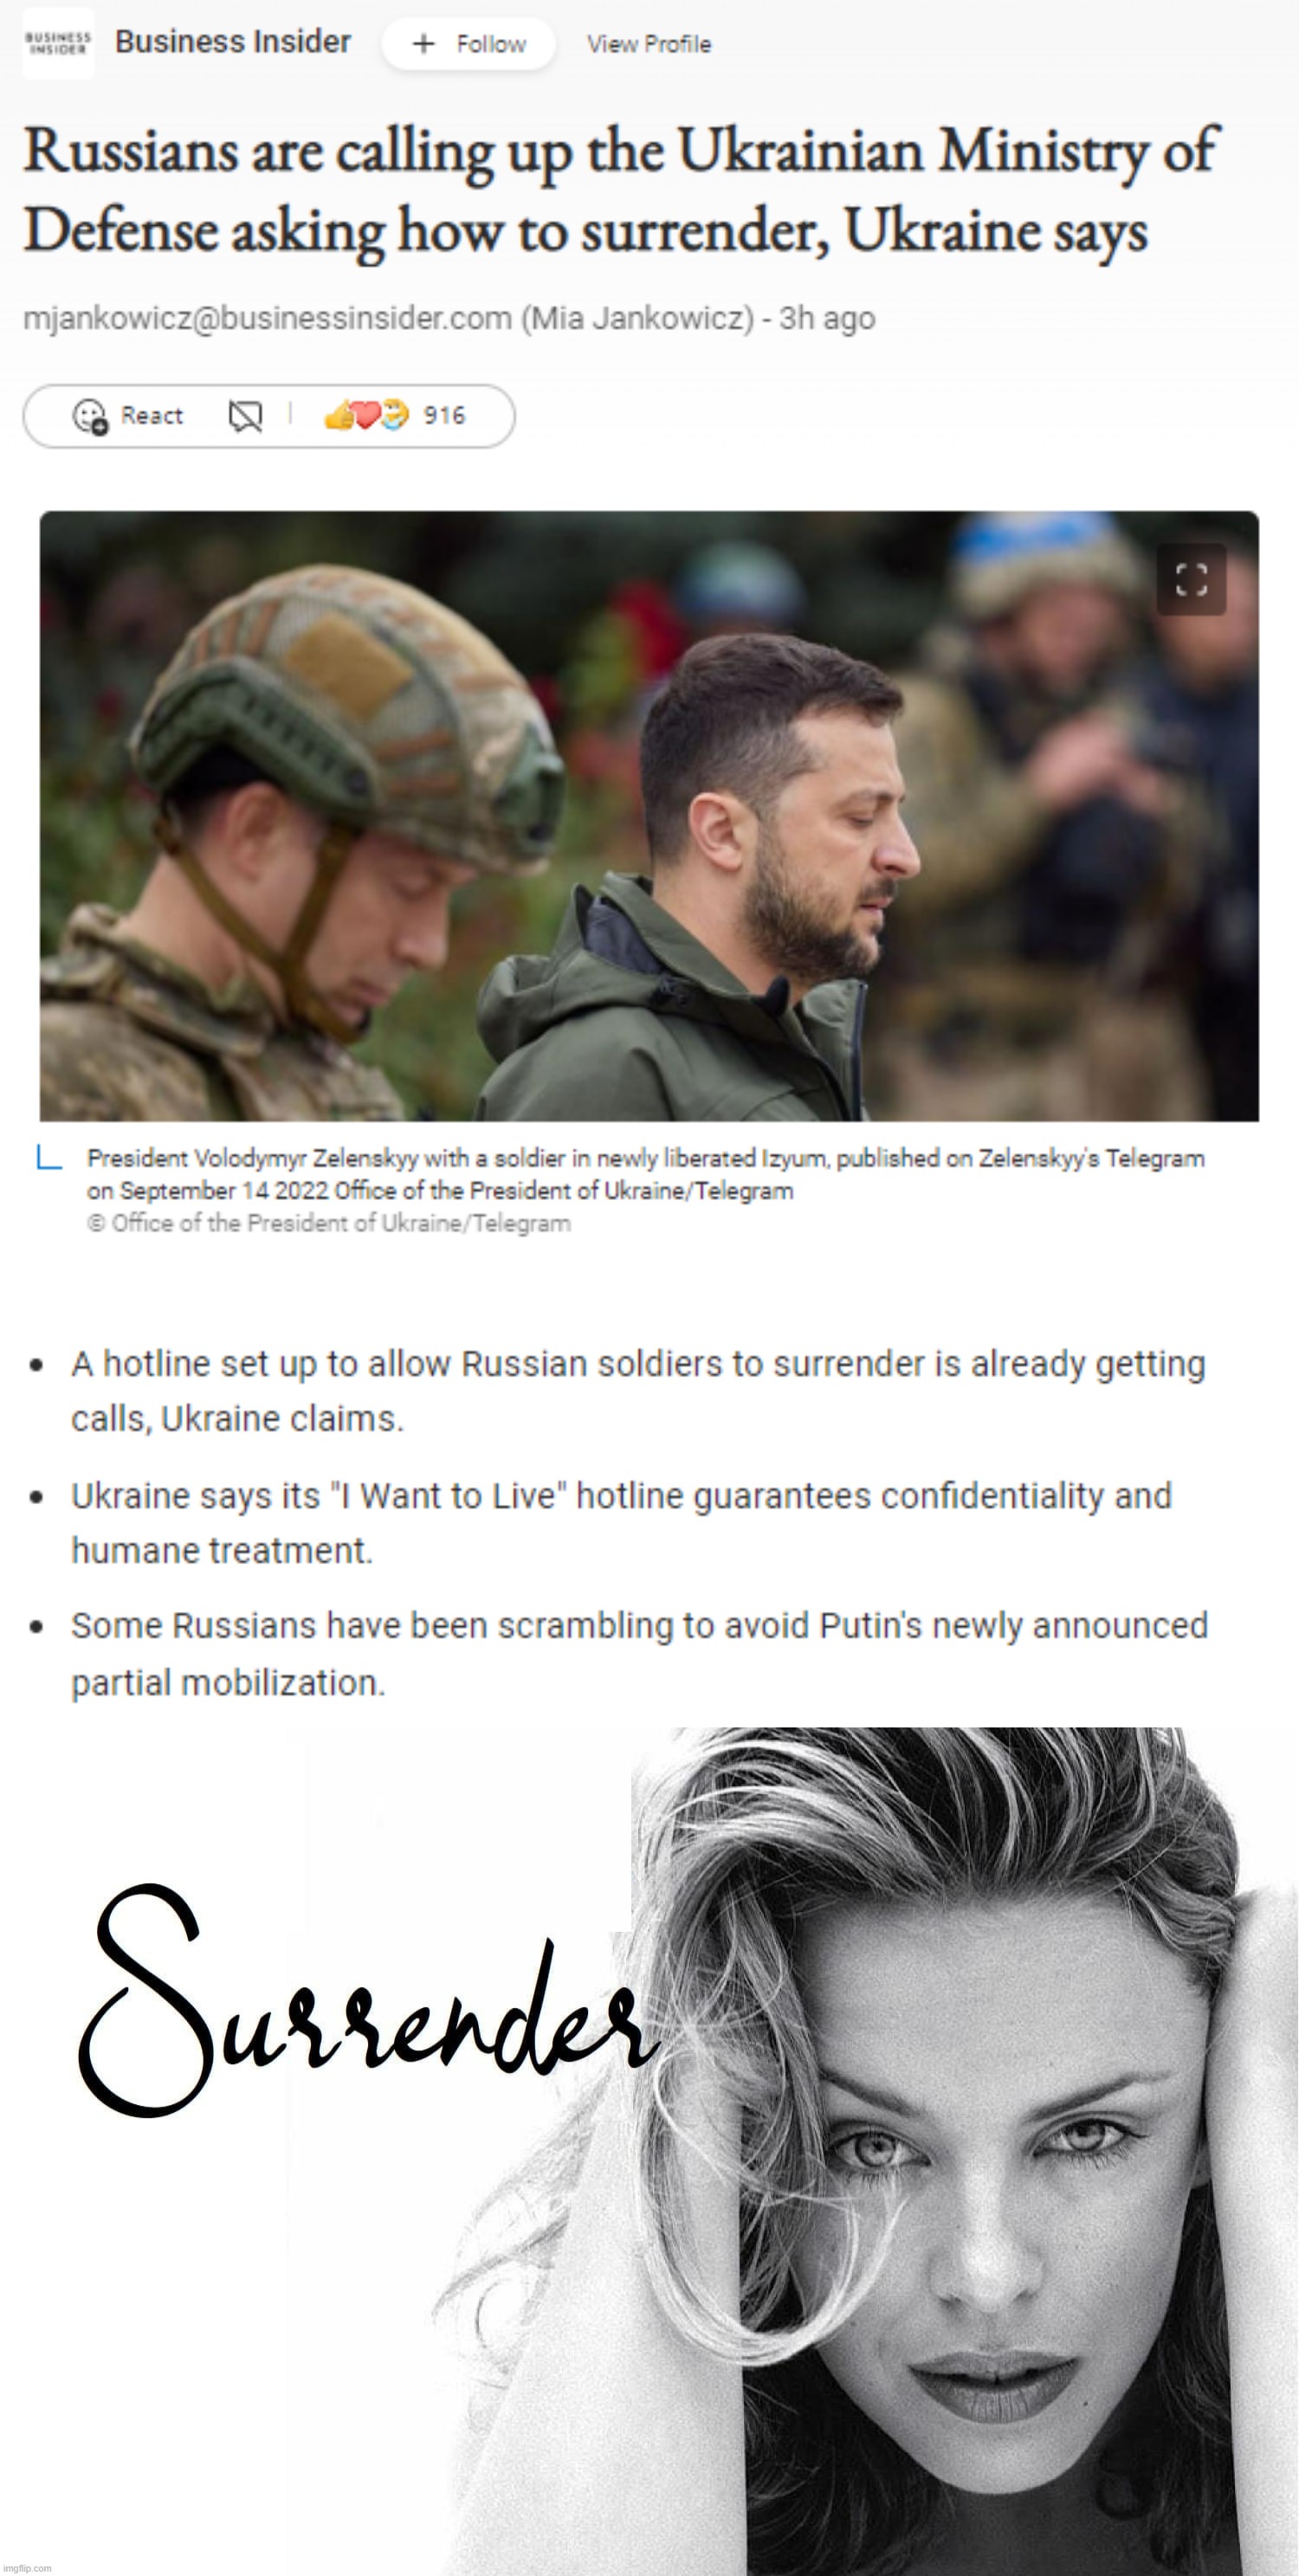 Radical pro-Western propaganda rag Business Insider reports Russians are surrendering. Who will believe them? | image tagged in russians surrendering,kylie surrender,radical,pro-western,propaganda,rag | made w/ Imgflip meme maker